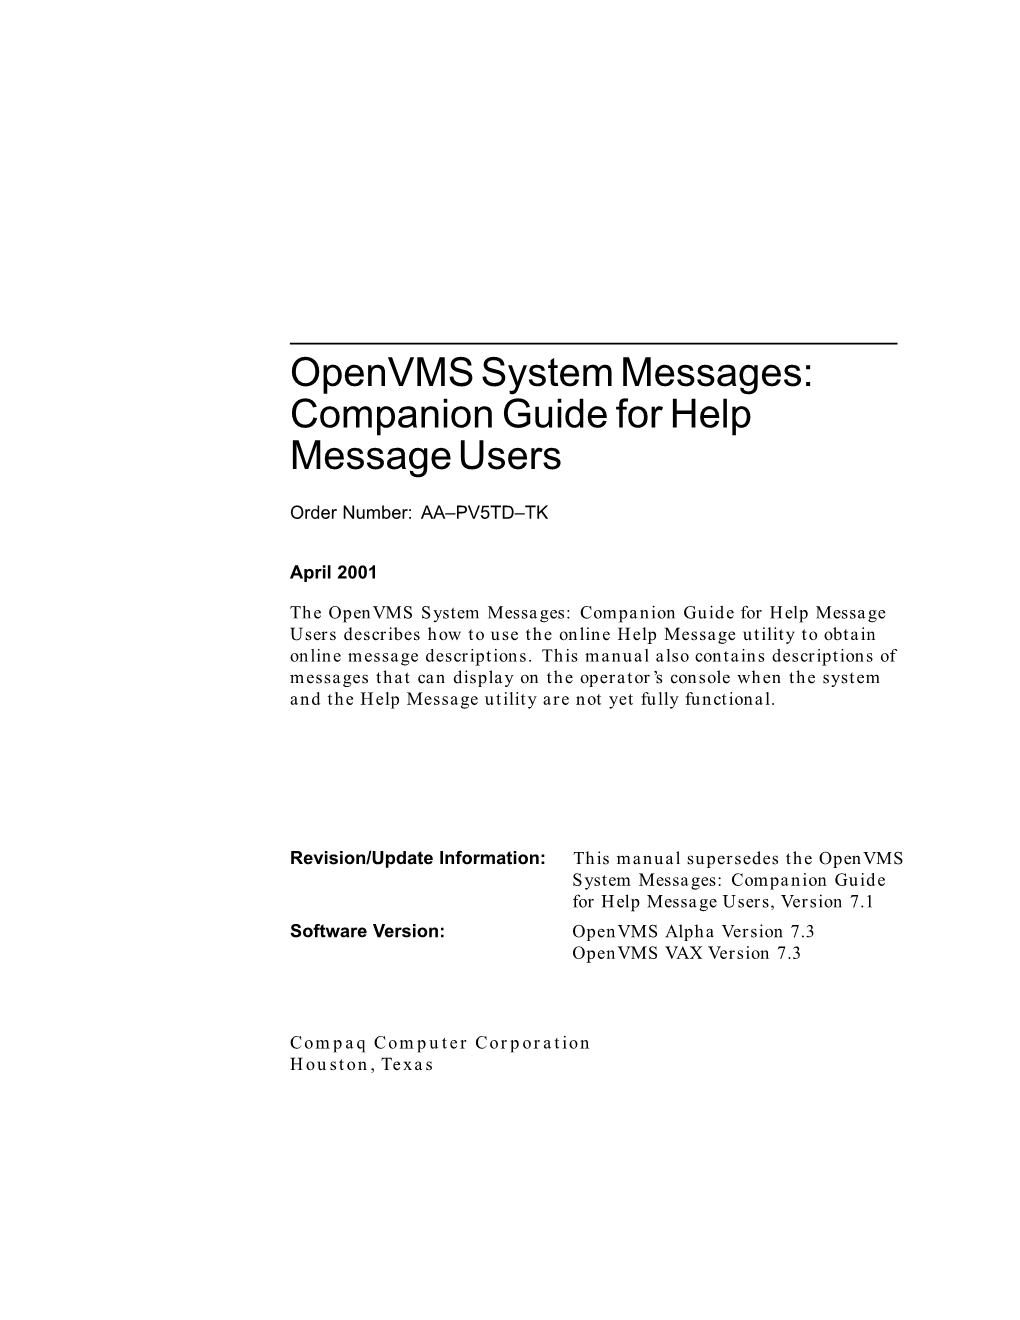 Openvms System Messages: Companion Guide for Help Message Users